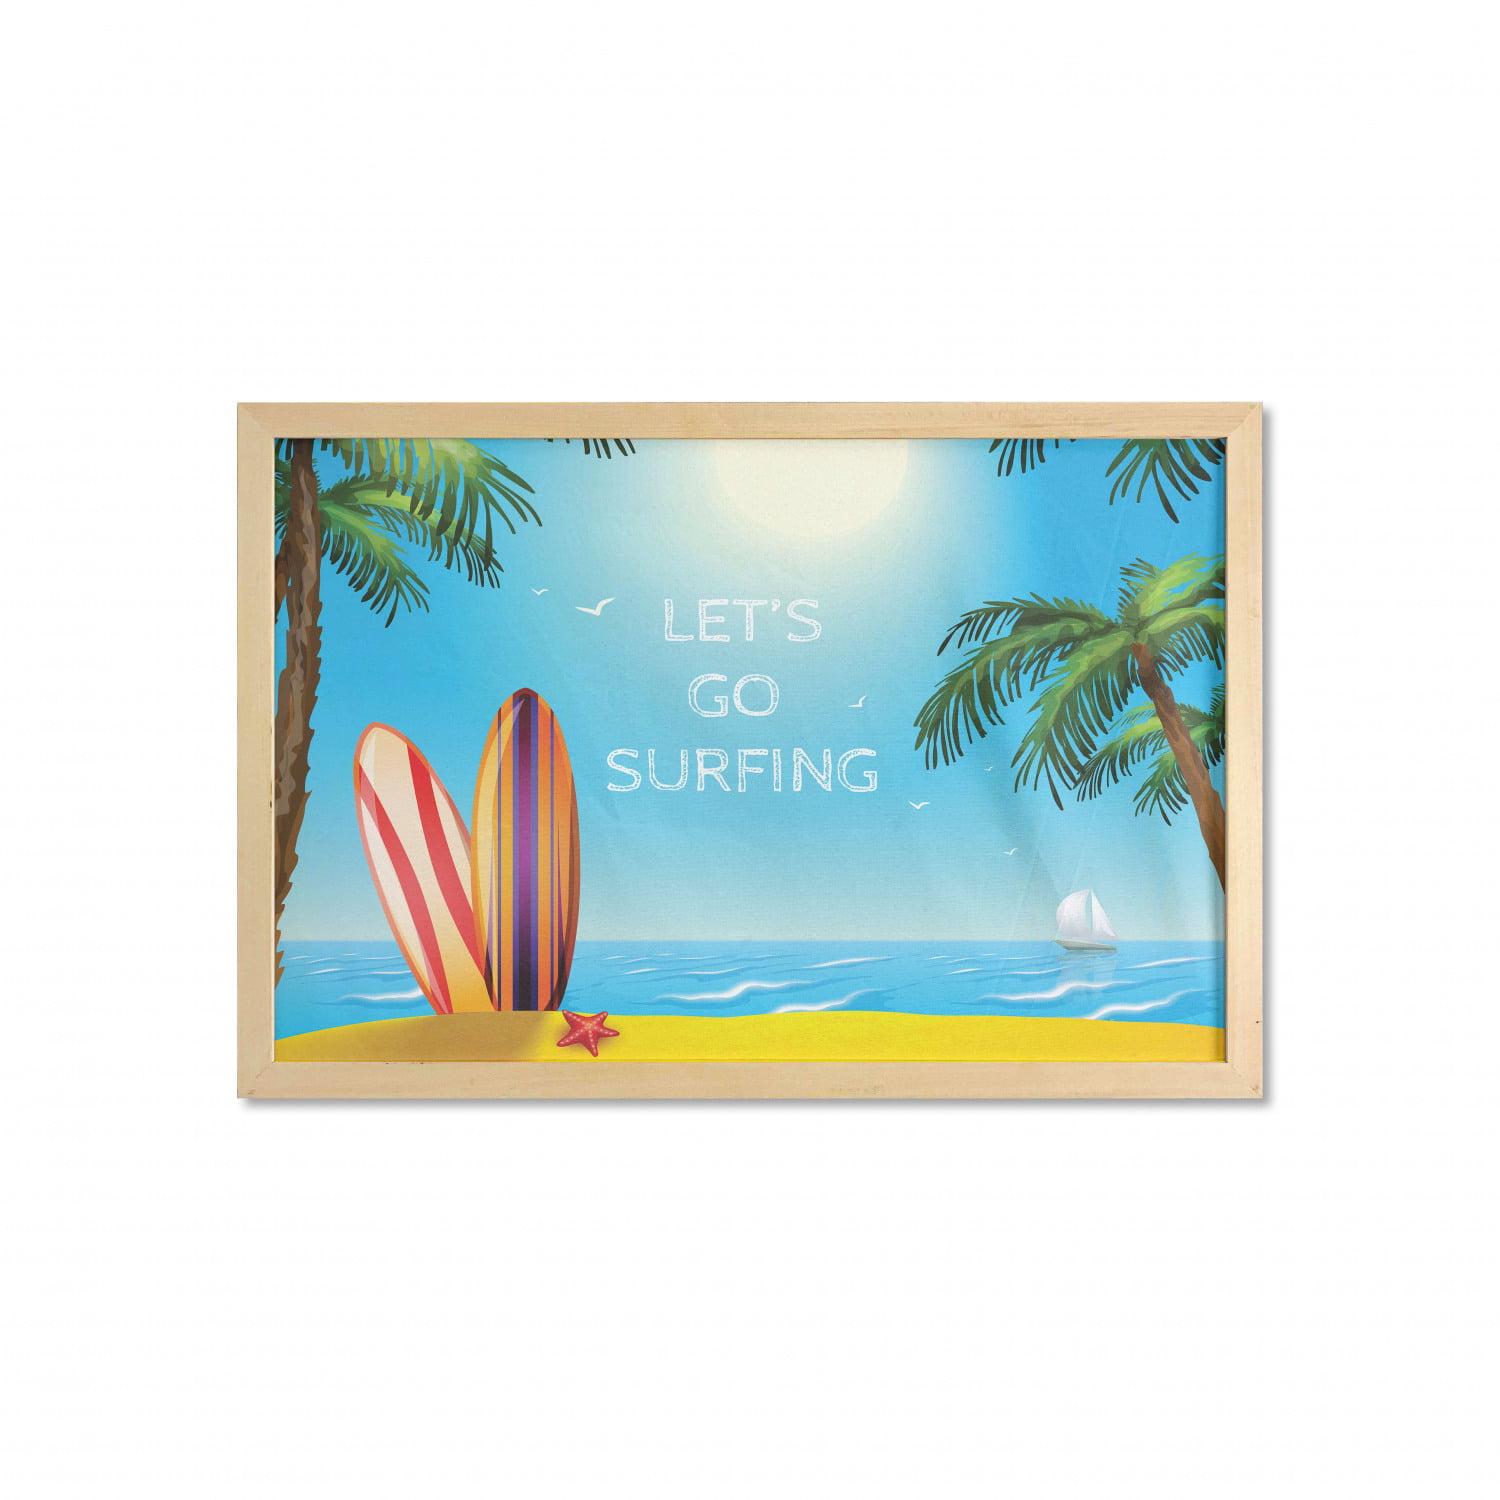 SURFING Poster Surfboards On The Beach Full Size 24x36 ~ Tropical Scenic 